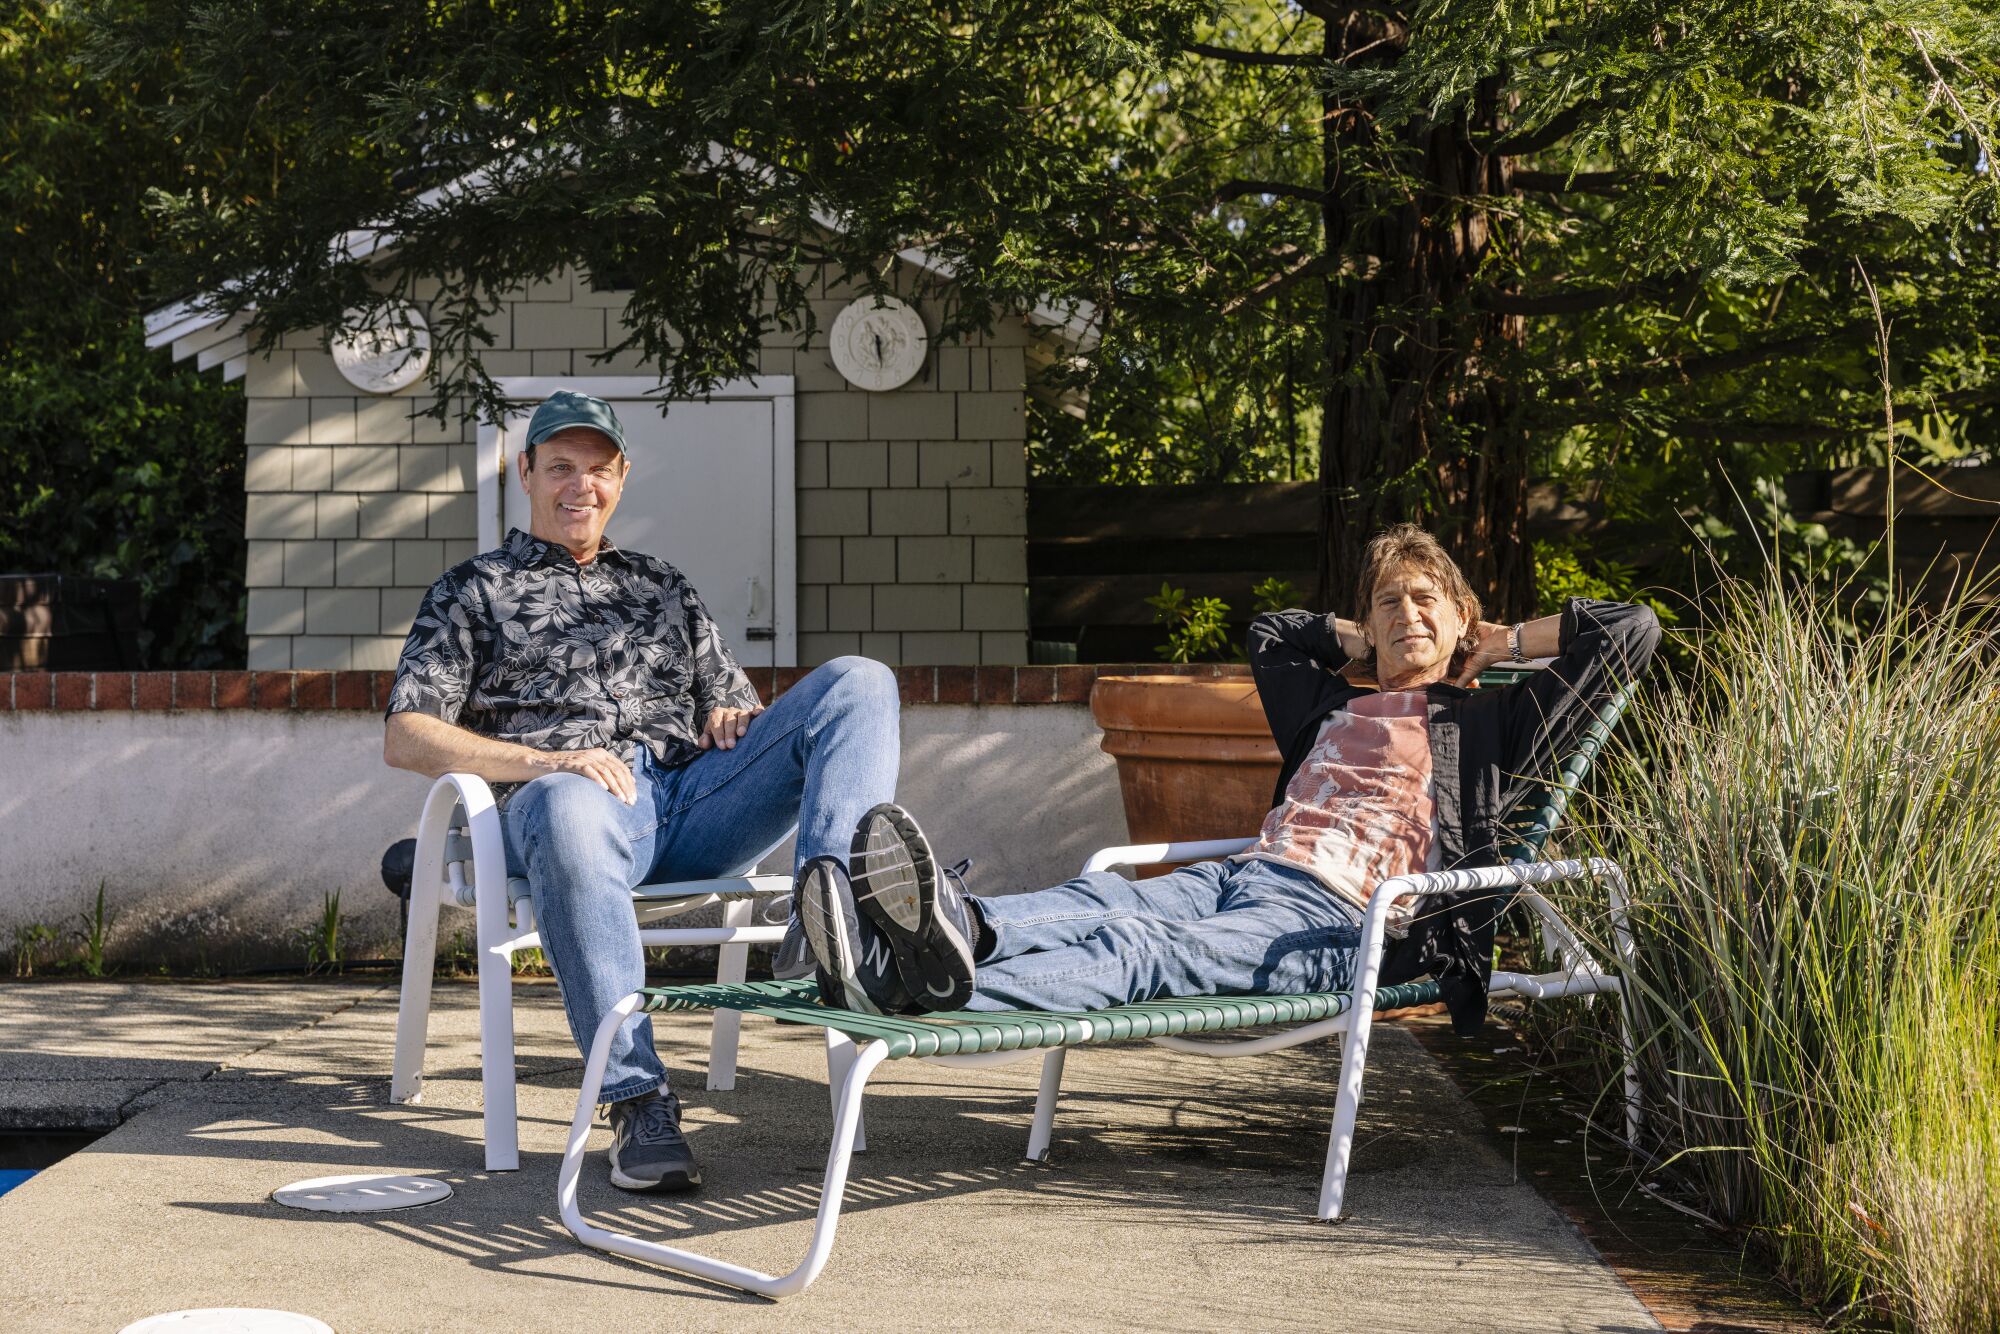 Dave Reddix and Steve Capper sit on lawnchairs